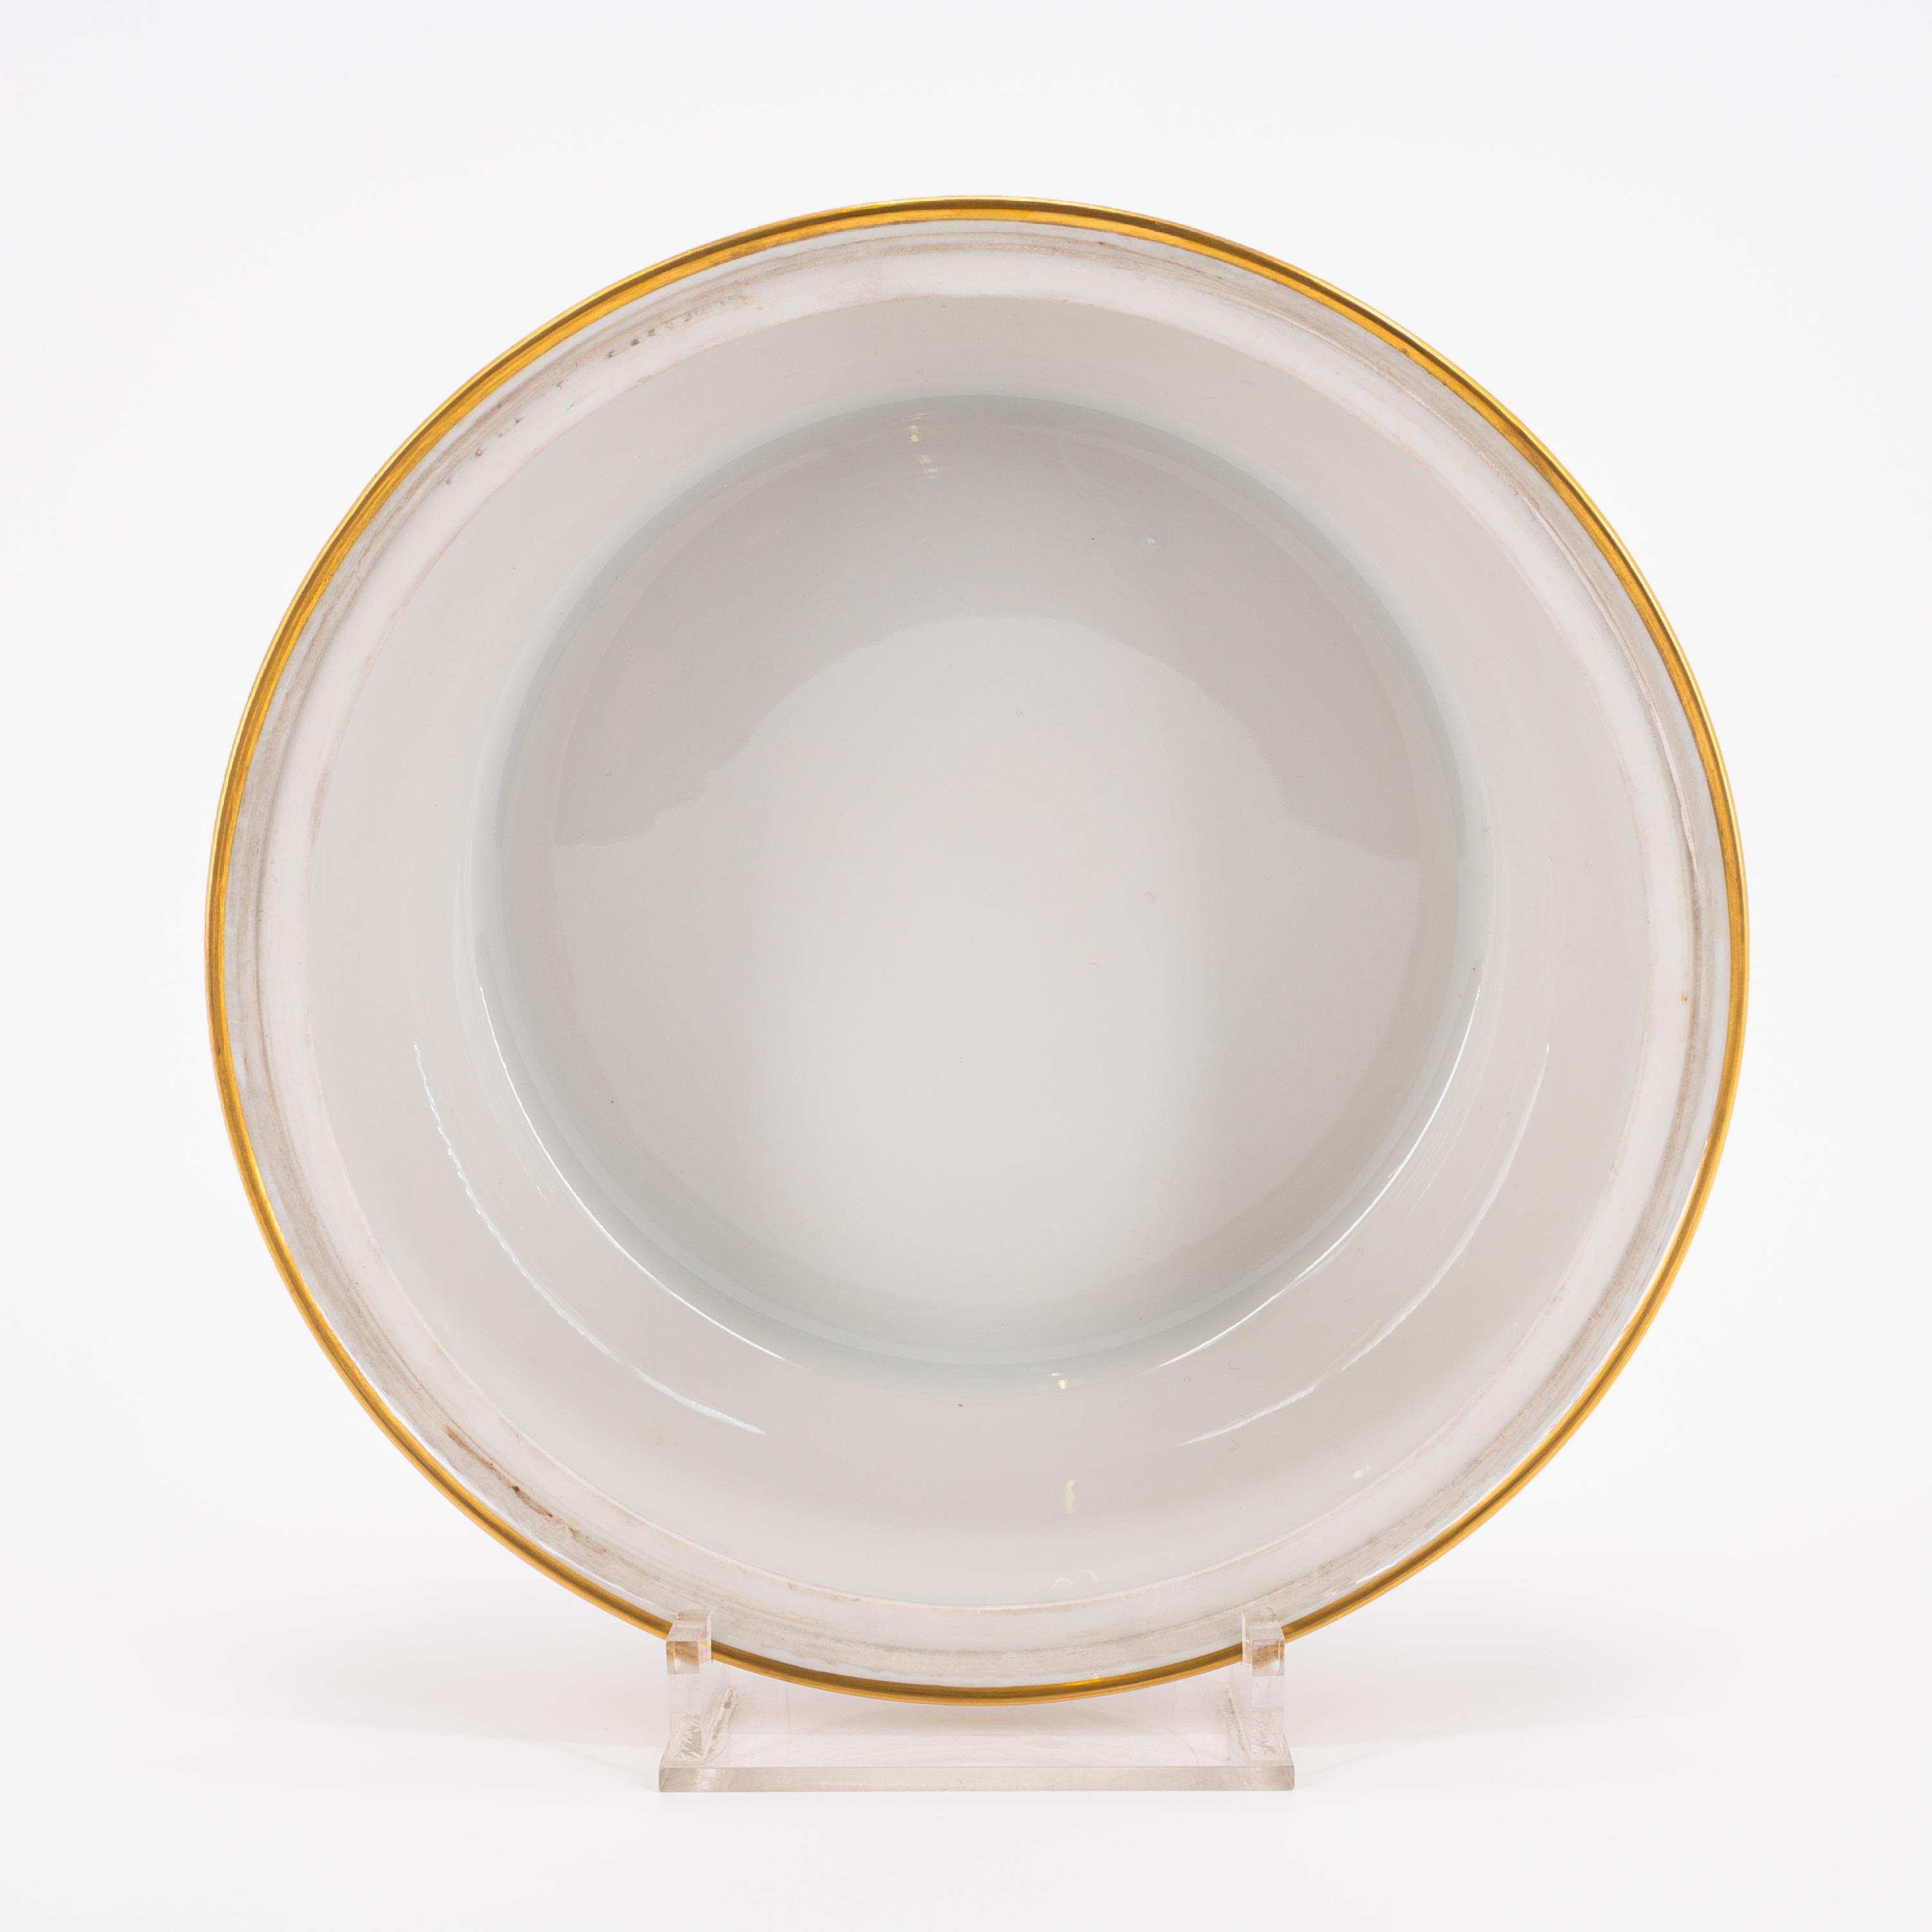 18 PIECES FROM A PORCELAIN DINNER SERVICE 'FLORA DANICA' - Image 18 of 26